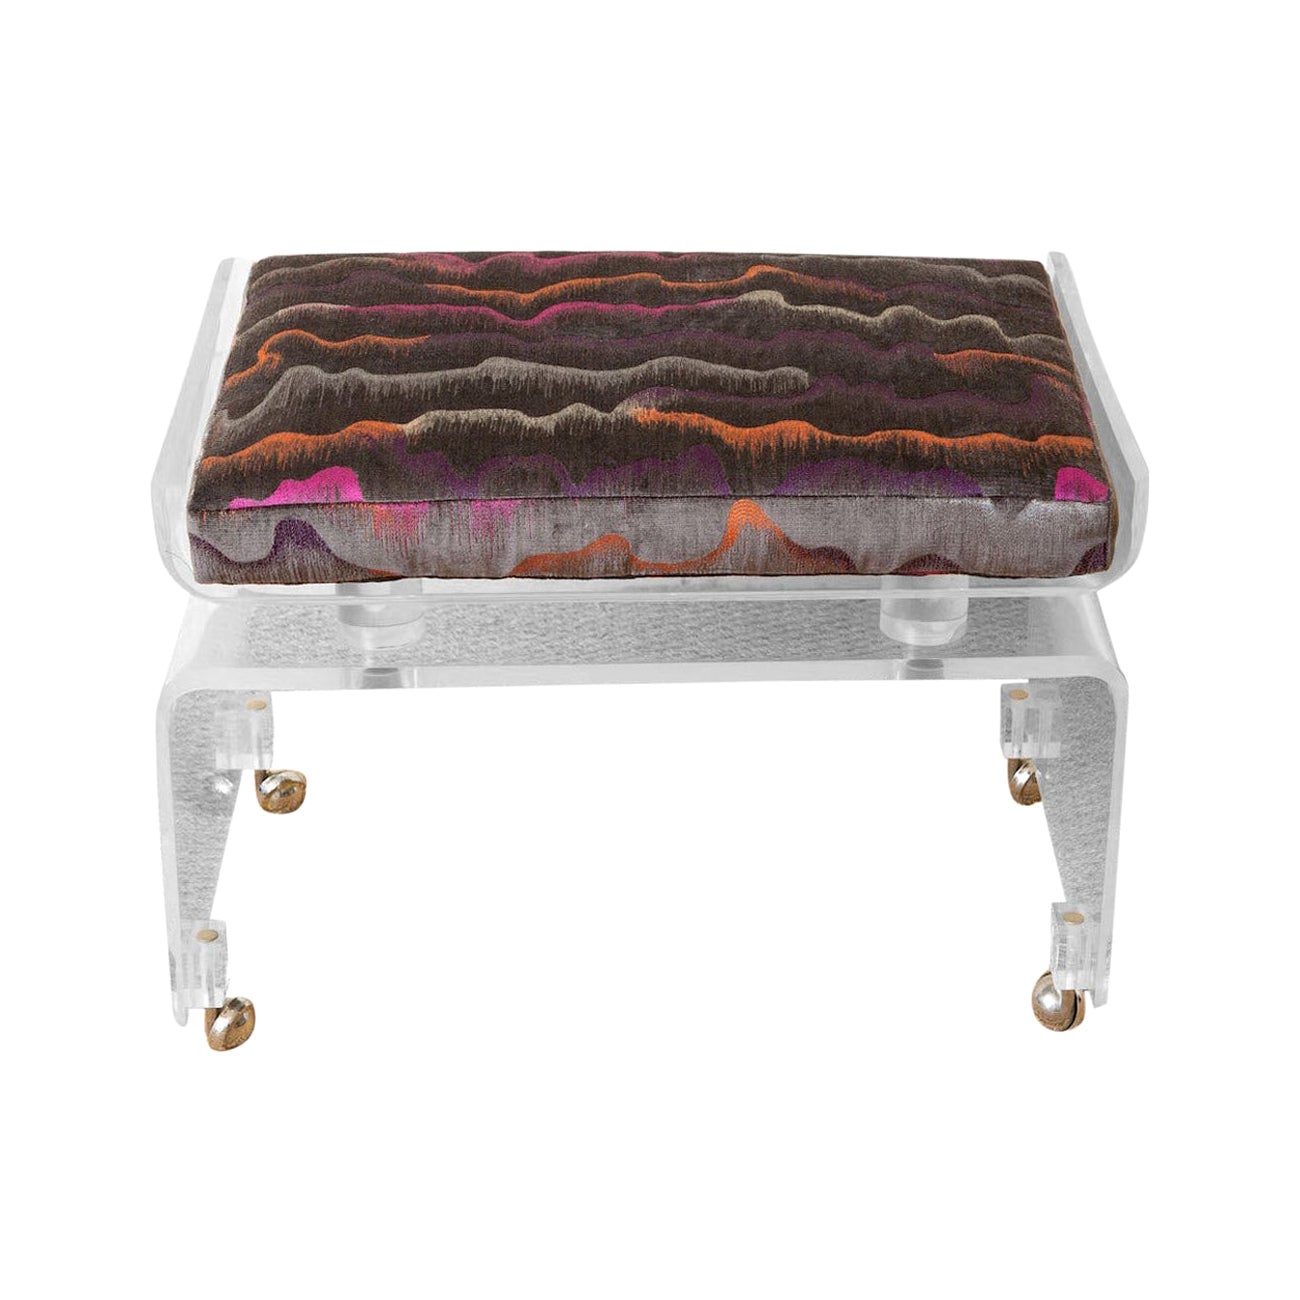 Lucite Vanity Bench on Wheels with Upholstered Gray, Magenta Cushion Vintage